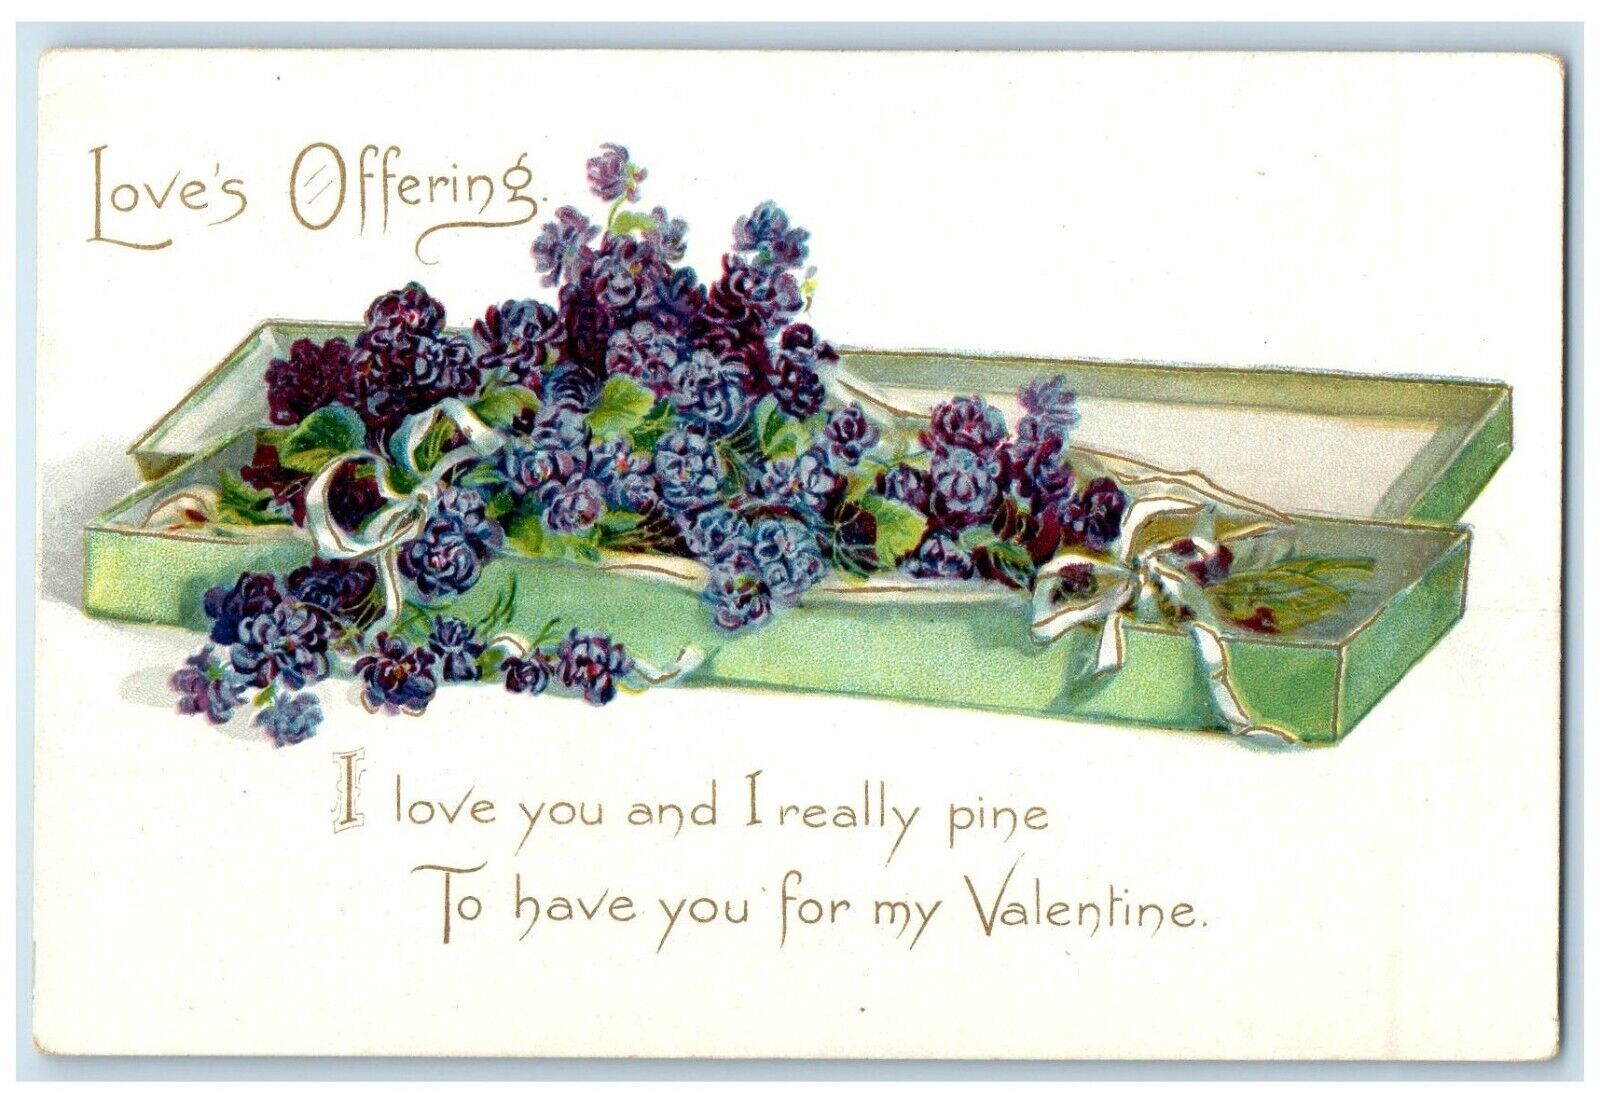 c1905 Valentine Love Offering Flowers In Box Unposted Antique Postcard